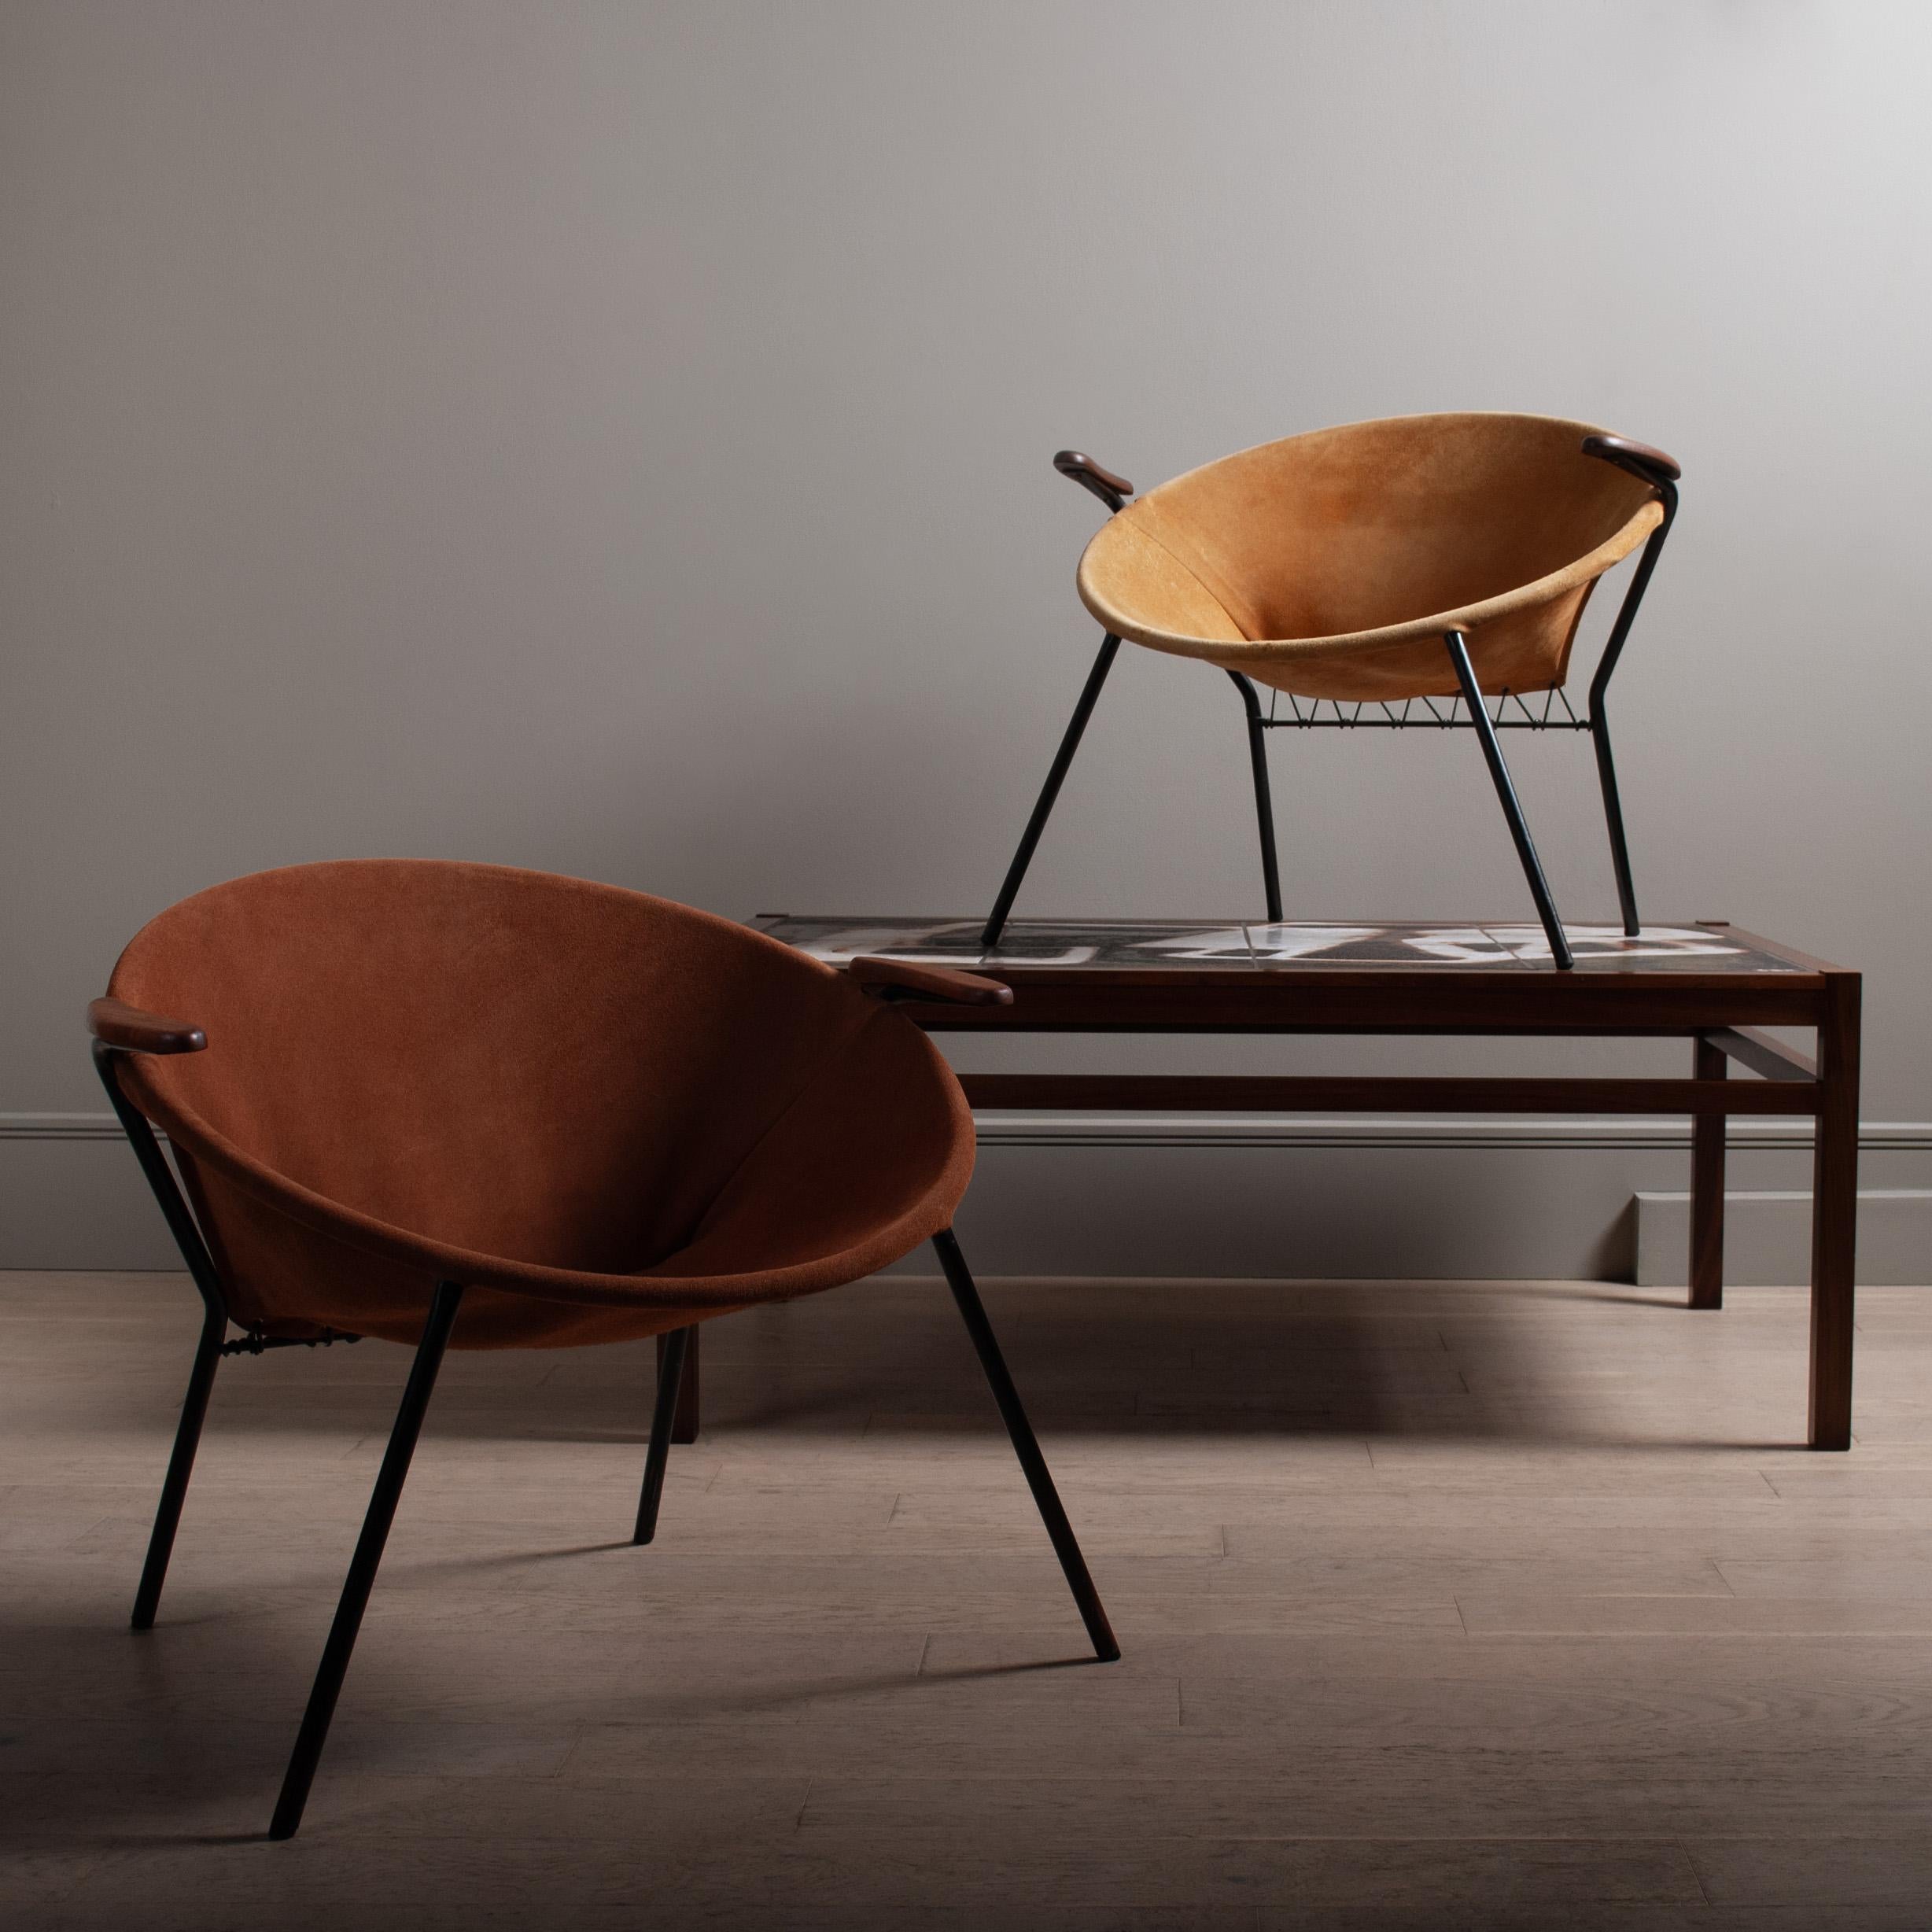 An early balloon or 'hoop' chair by Hans Olsen, circa 1955, Denmark.
All original leather suede upholstery on the circular metal frame with sweet little teak arms. A charming chair design by renowned designer Hans Olsen. A lighter tan version is